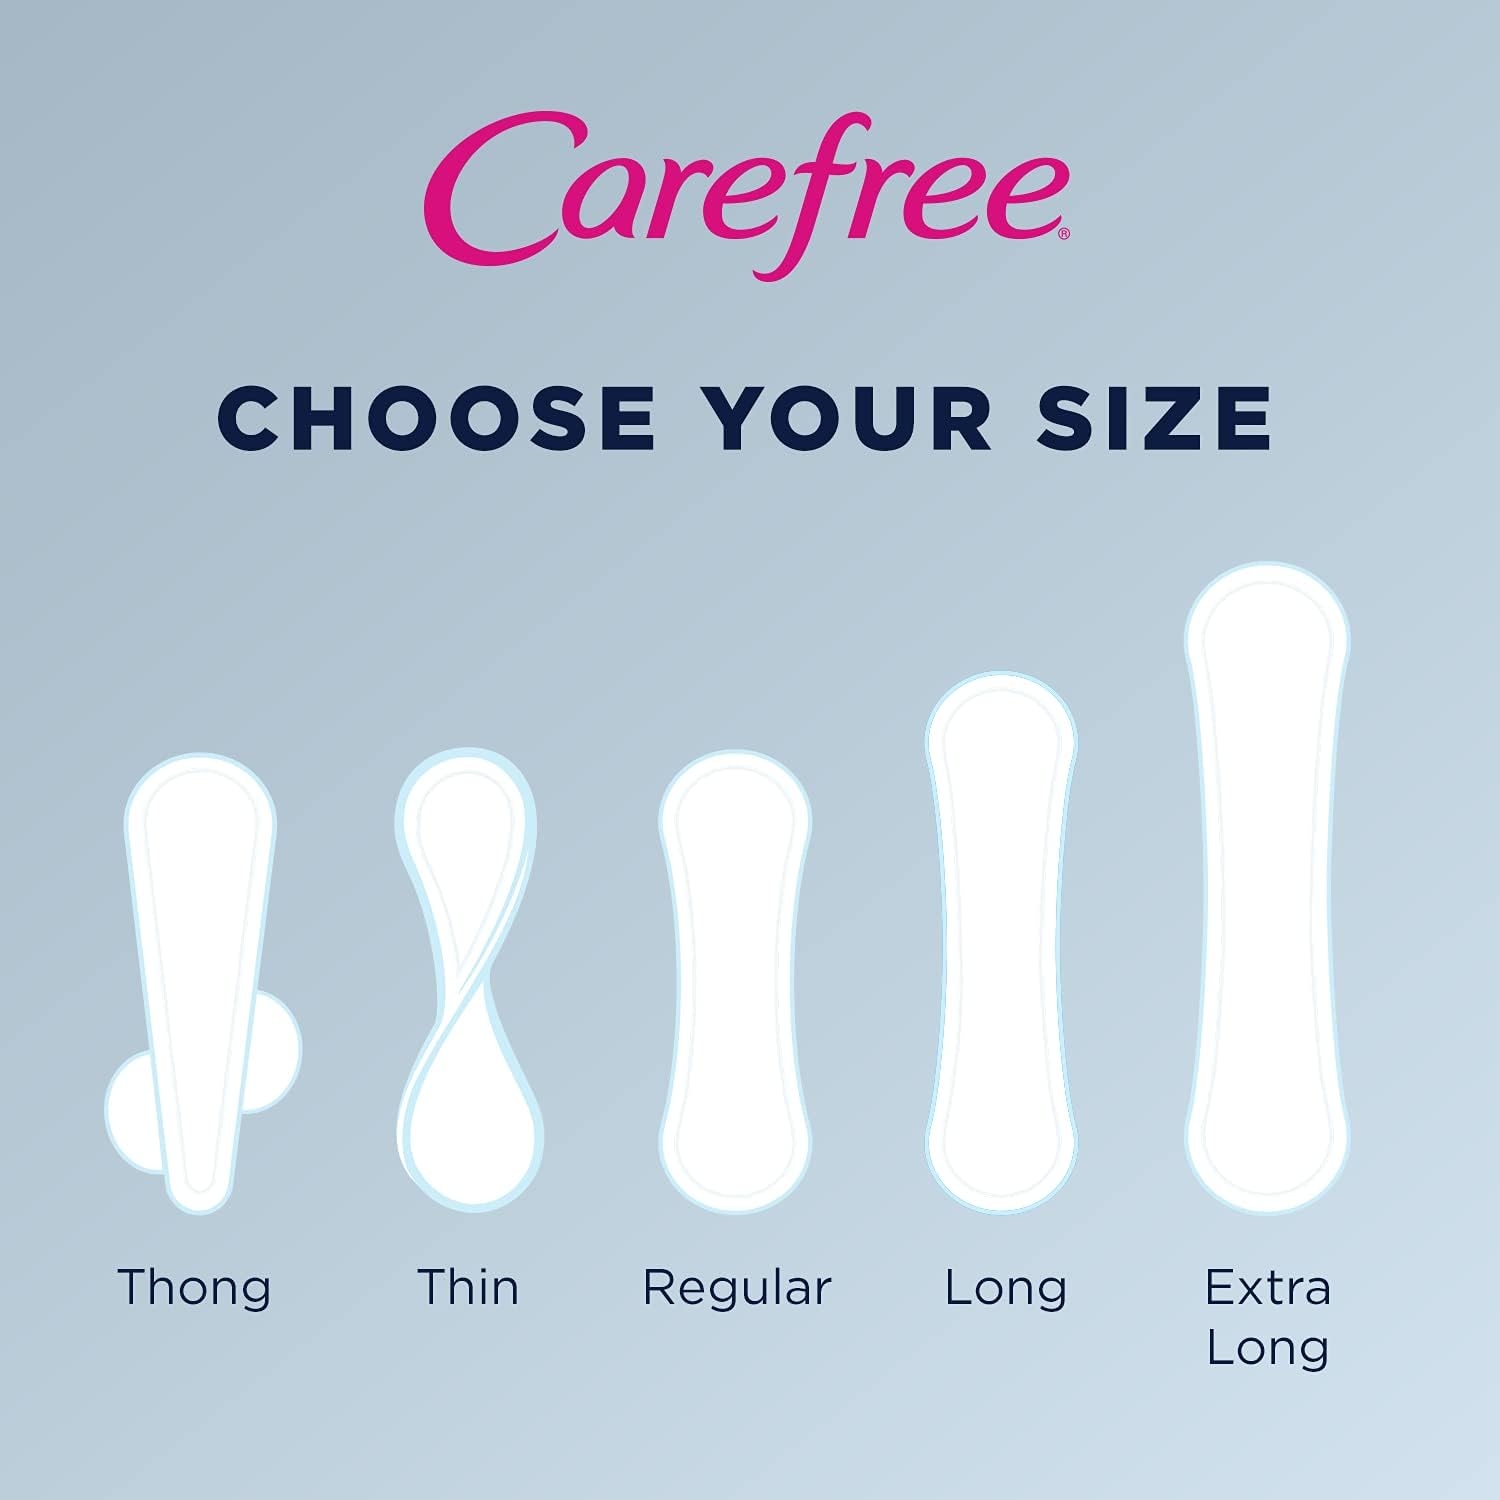 Carefree Body Shape Pant Liners, Regular, Multicolor Unscented 54 Count (Pack of 1)